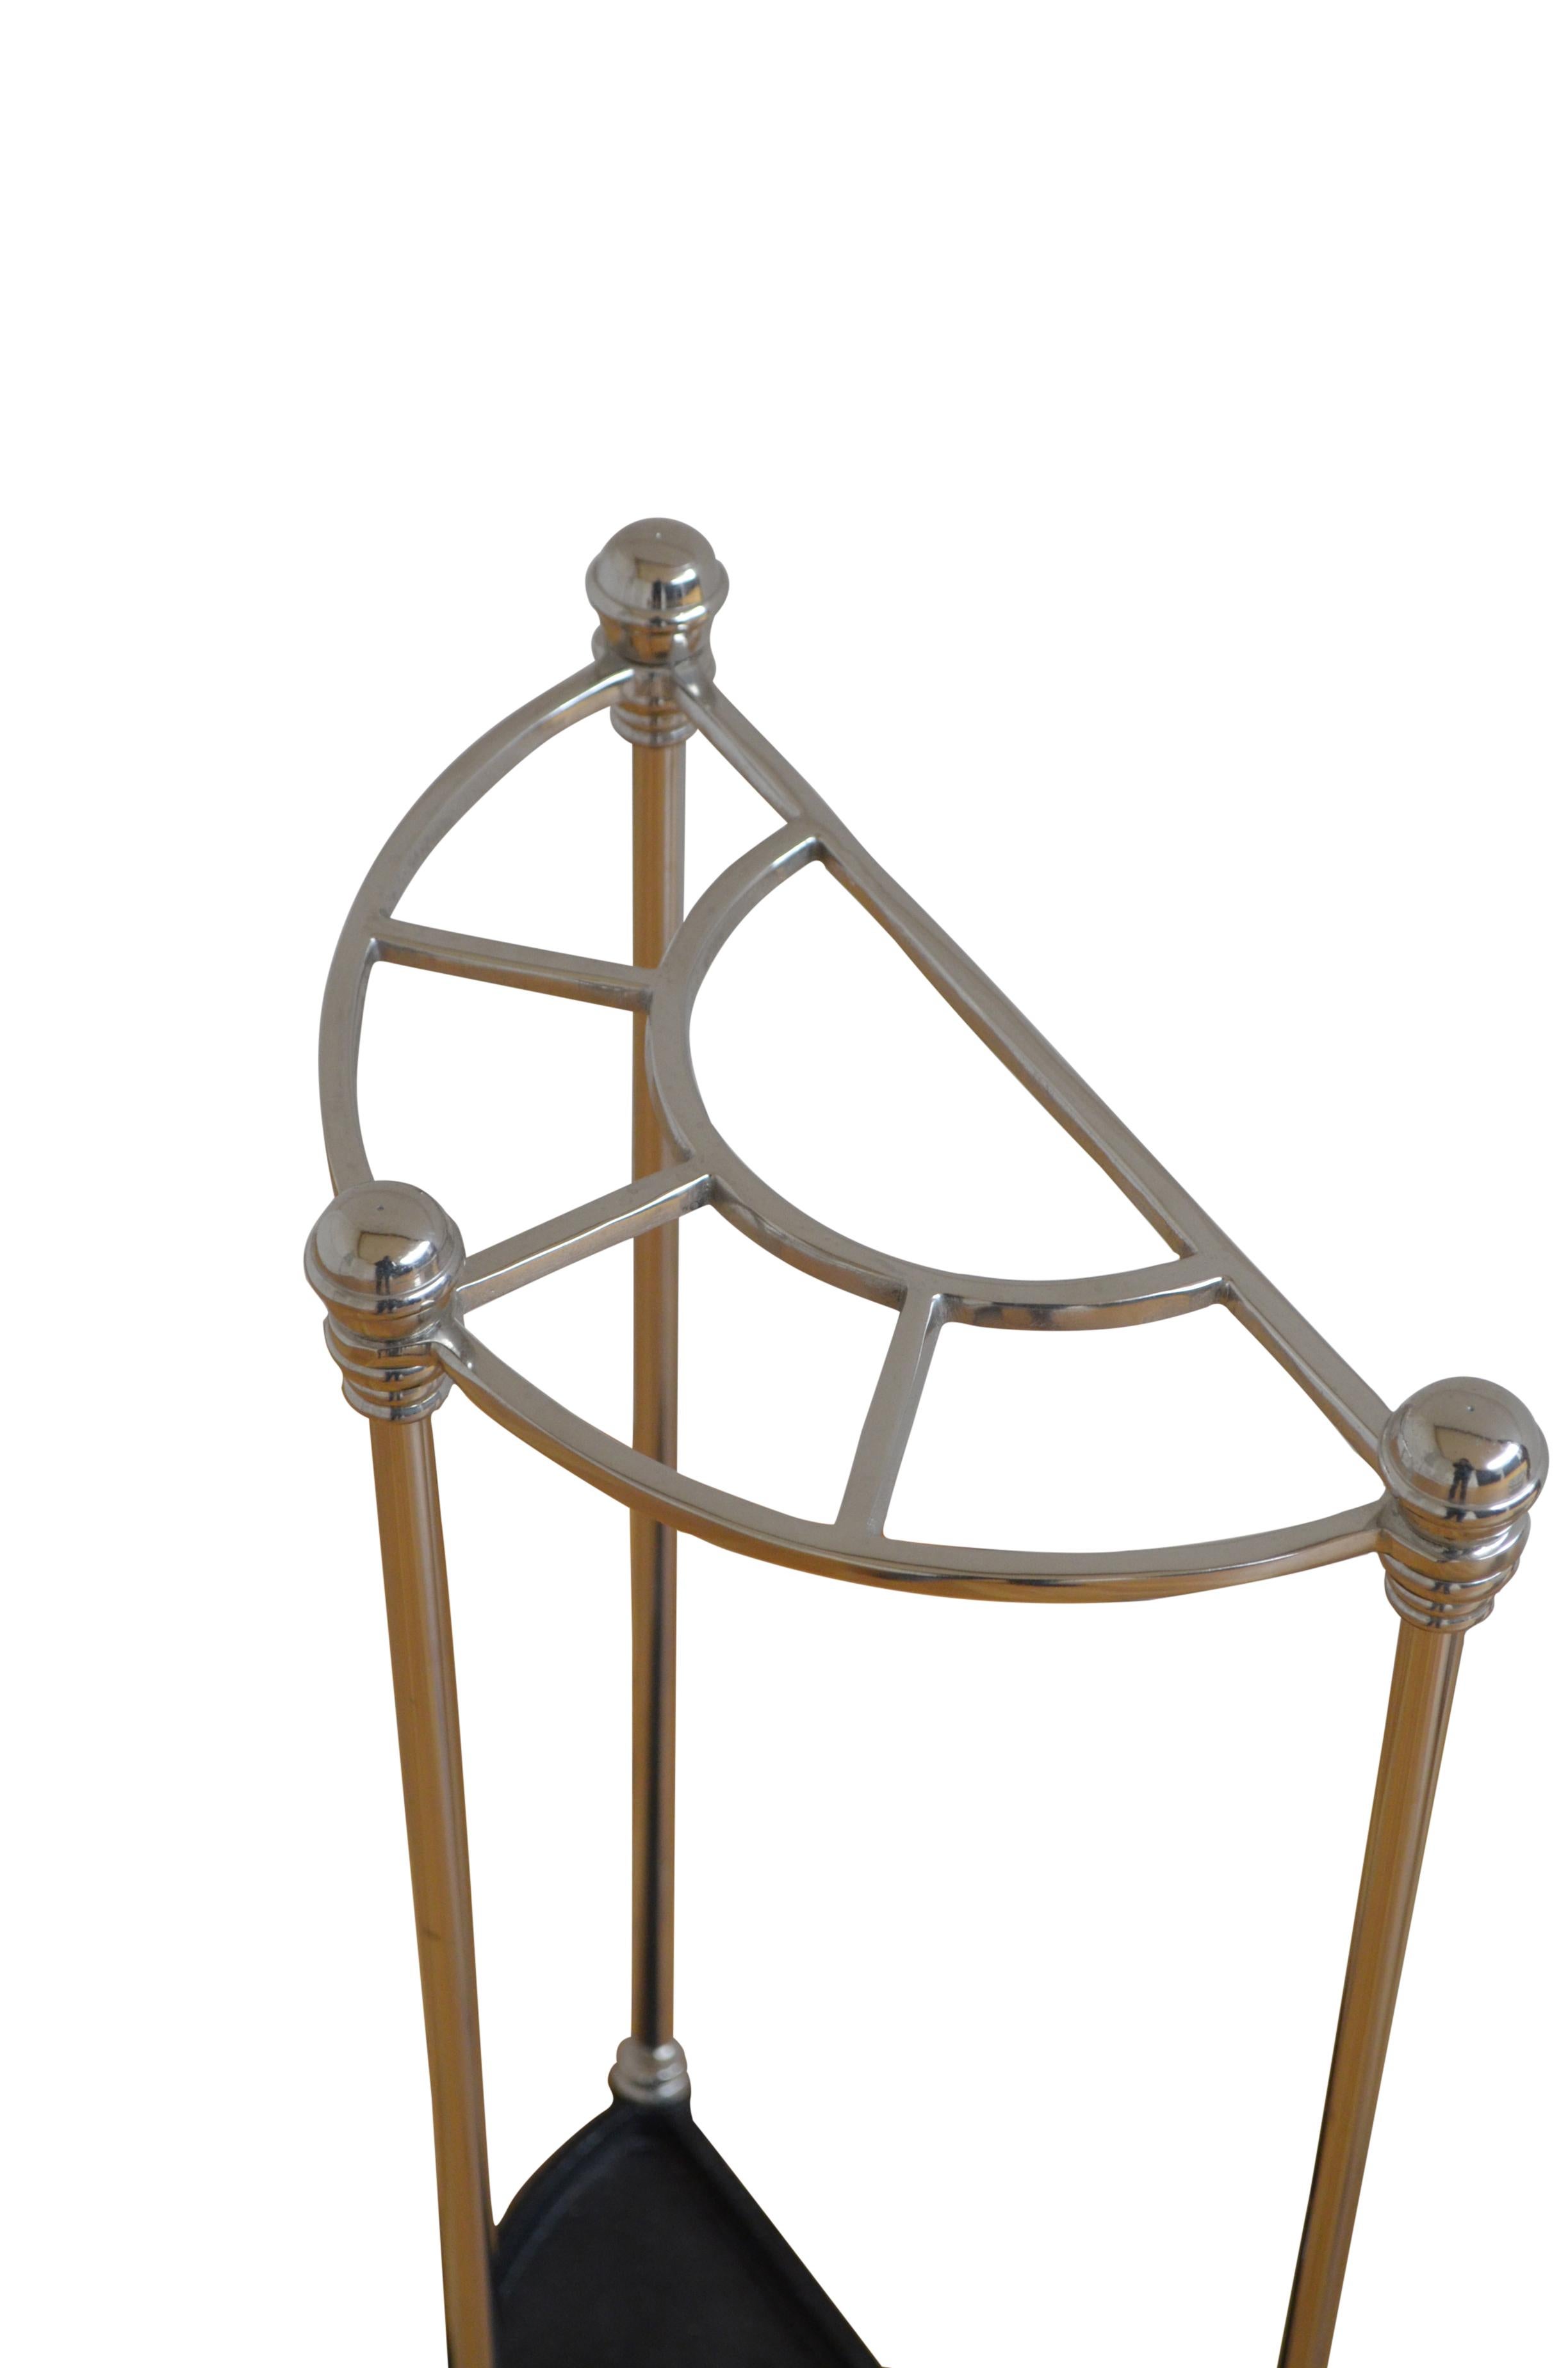 English Art Deco Stainless Steel Umbrella Stand For Sale